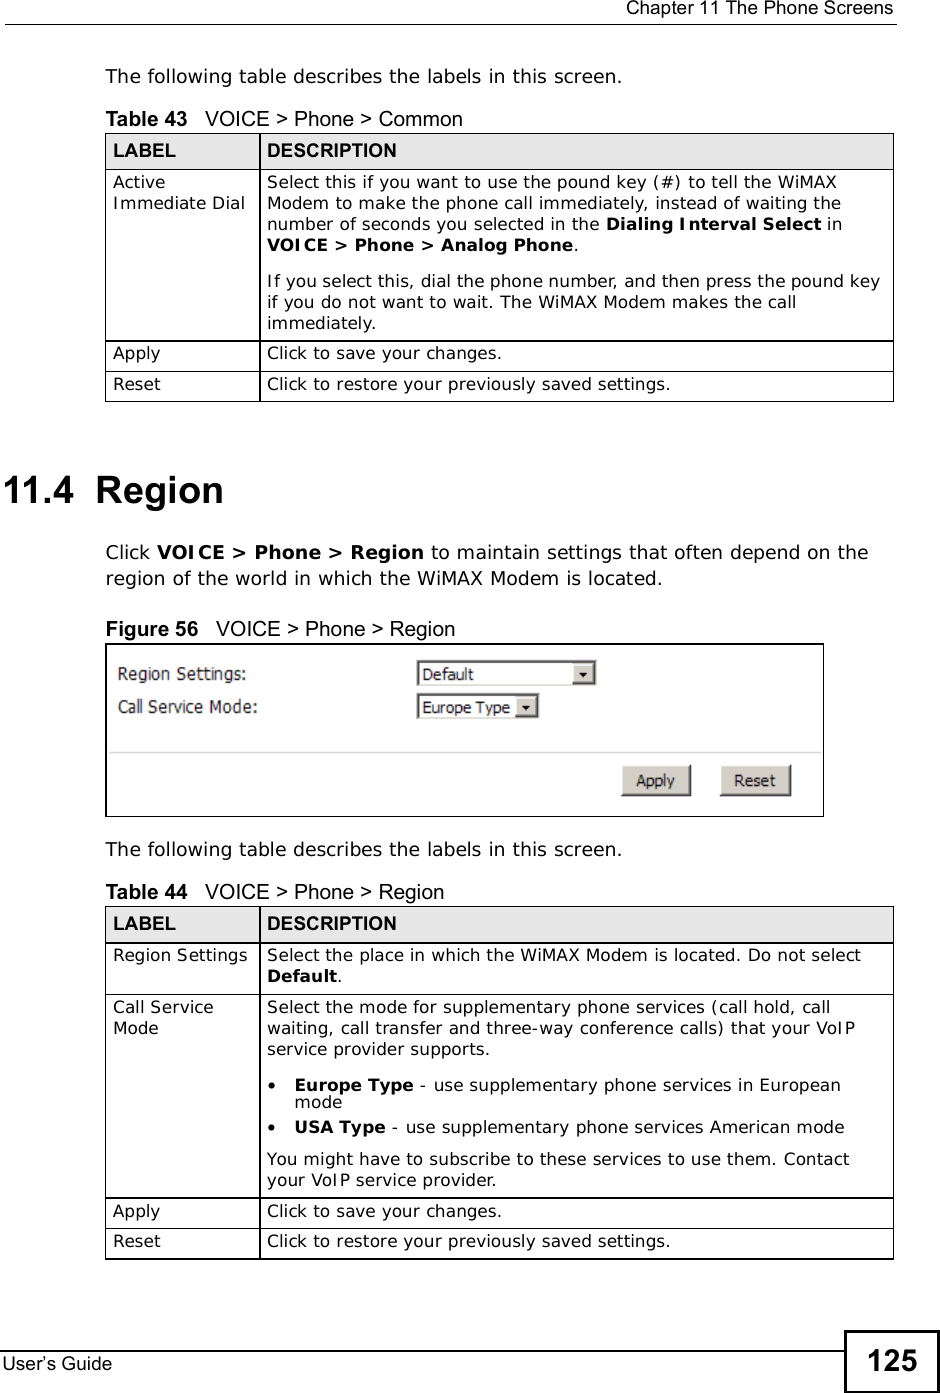  Chapter 11The Phone ScreensUser s Guide 125The following table describes the labels in this screen.11.4  RegionClick VOICE &gt; Phone &gt; Region to maintain settings that often depend on the region of the world in which the WiMAX Modem is located.Figure 56   VOICE &gt; Phone &gt; RegionThe following table describes the labels in this screen.Table 43   VOICE &gt; Phone &gt; CommonLABEL DESCRIPTIONActive Immediate Dial Select this if you want to use the pound key (#) to tell the WiMAX Modem to make the phone call immediately, instead of waiting the number of seconds you selected in the Dialing Interval Select in VOICE &gt; Phone &gt; Analog Phone.If you select this, dial the phone number, and then press the pound key if you do not want to wait. The WiMAX Modem makes the call immediately. Apply Click to save your changes.Reset Click to restore your previously saved settings.Table 44   VOICE &gt; Phone &gt; RegionLABEL DESCRIPTIONRegion Settings Select the place in which the WiMAX Modem is located. Do not select Default.Call Service Mode Select the mode for supplementary phone services (call hold, call waiting, call transfer and three-way conference calls) that your VoIP service provider supports.•Europe Type - use supplementary phone services in European mode•USA Type - use supplementary phone services American modeYou might have to subscribe to these services to use them. Contact your VoIP service provider.Apply Click to save your changes.Reset Click to restore your previously saved settings.